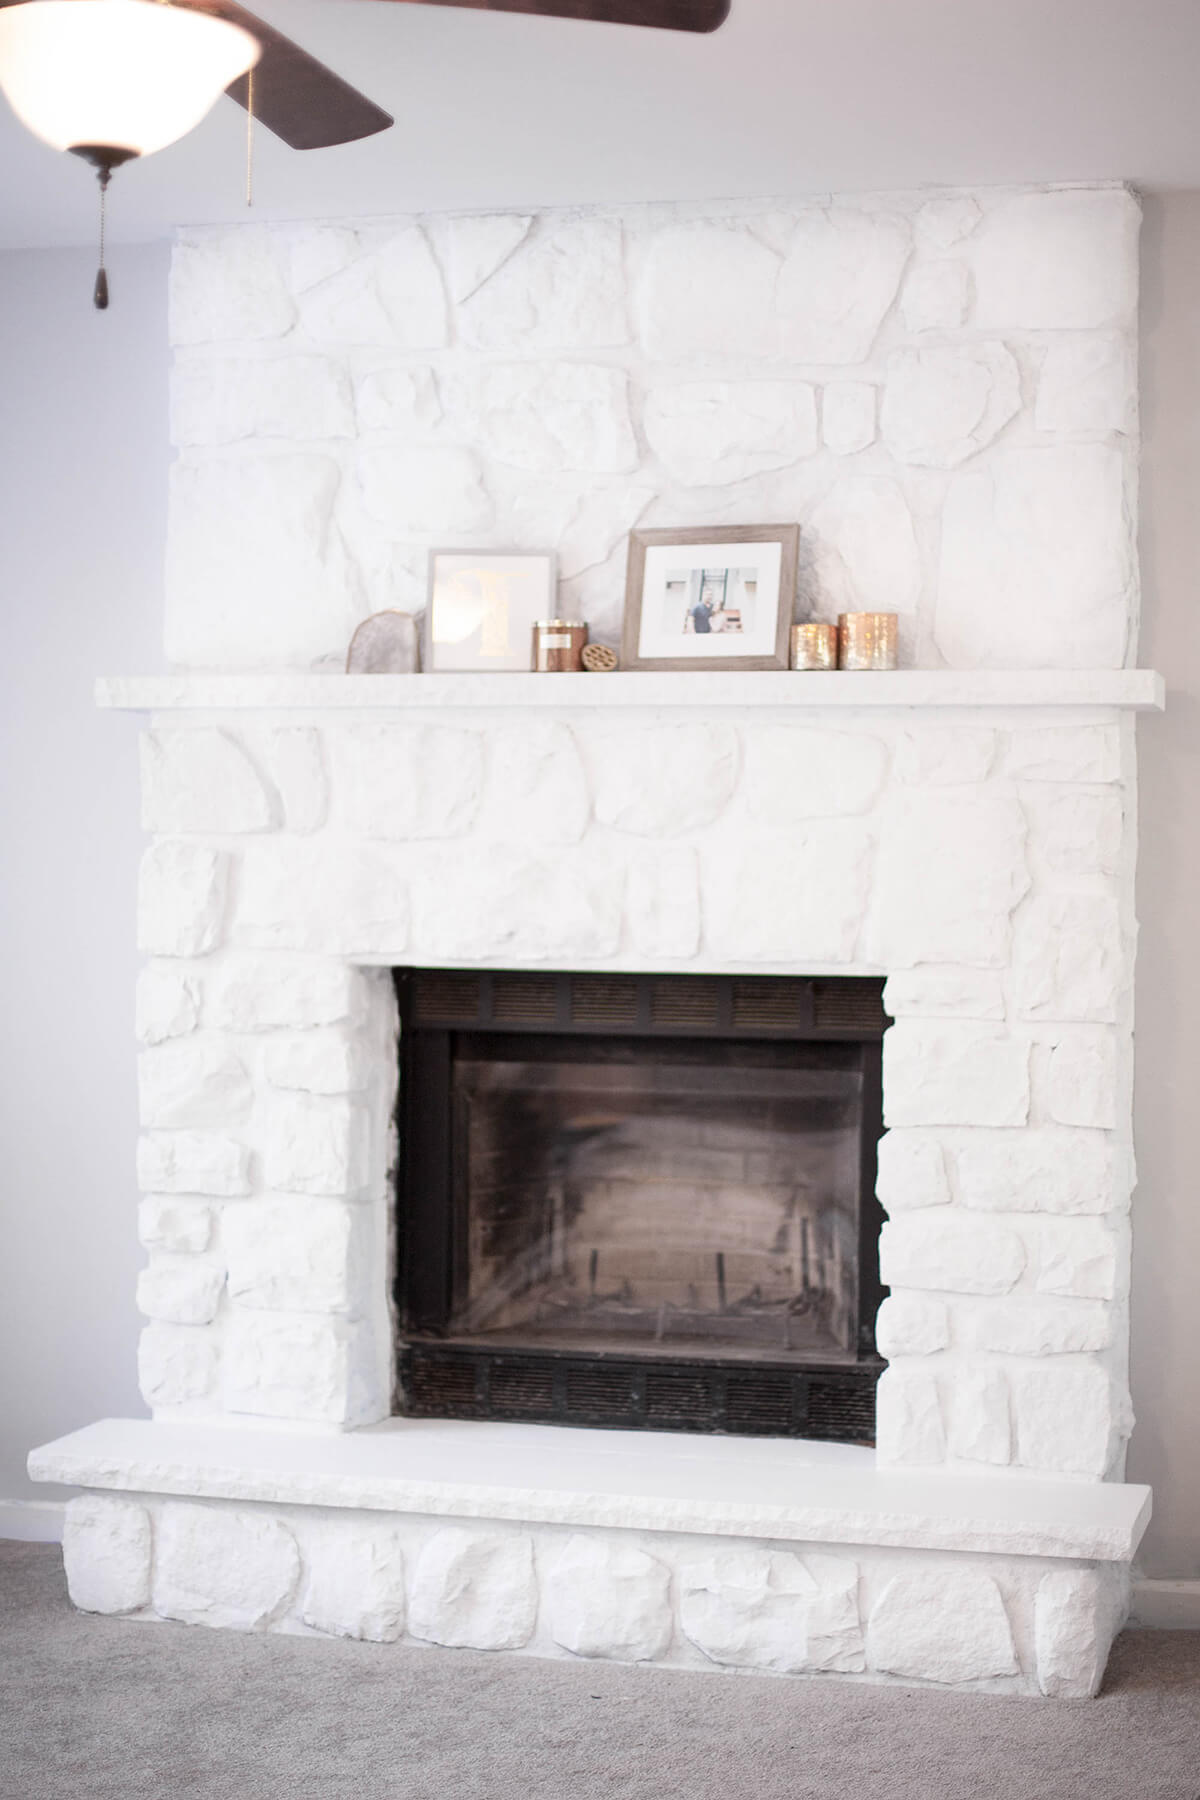 21 Best Stone Fireplace Ideas To Make, Stone Wall Fireplace Makeover